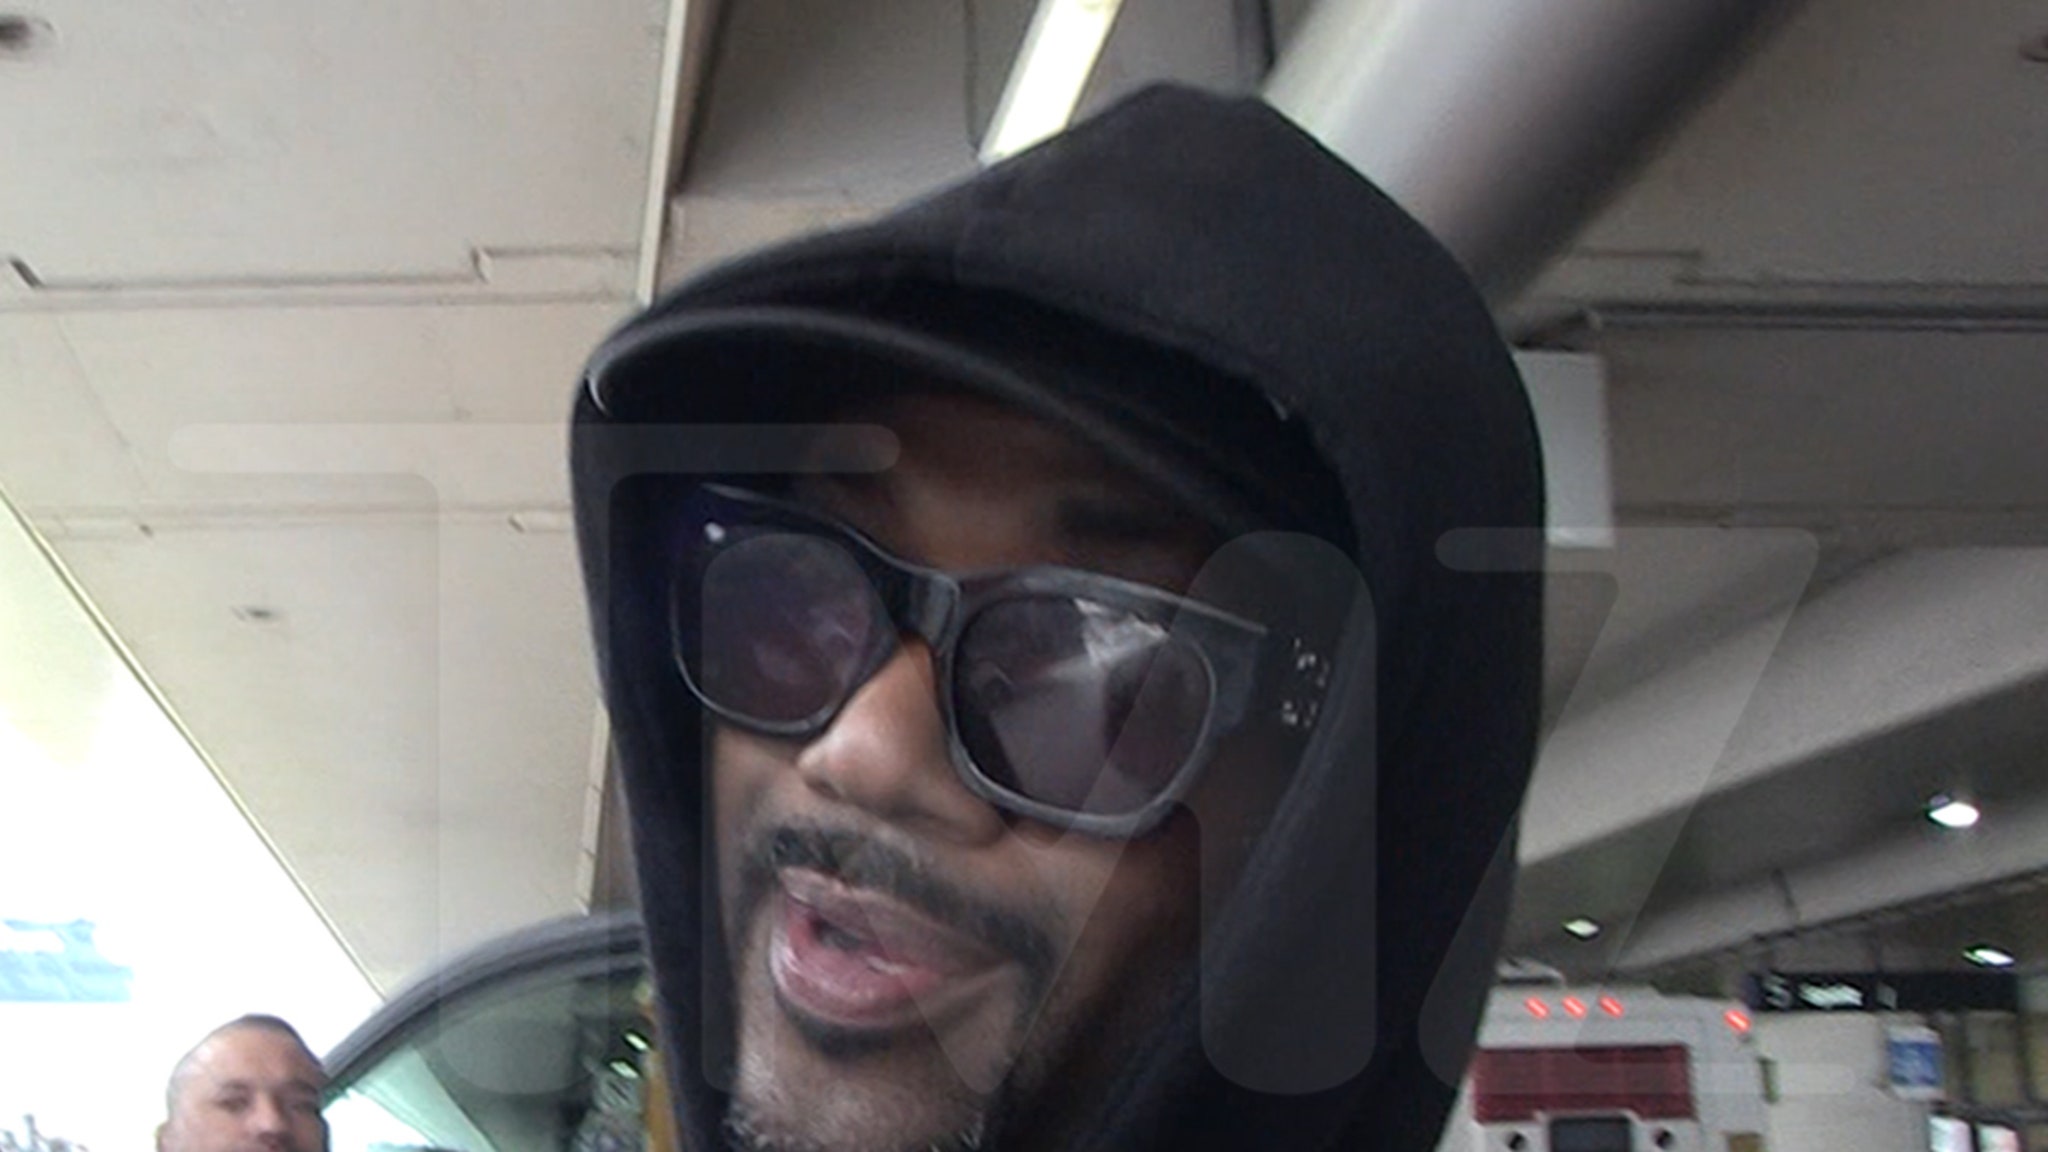 Ray J suggests that Diddy’s friends should take time to process before coming to his defense.